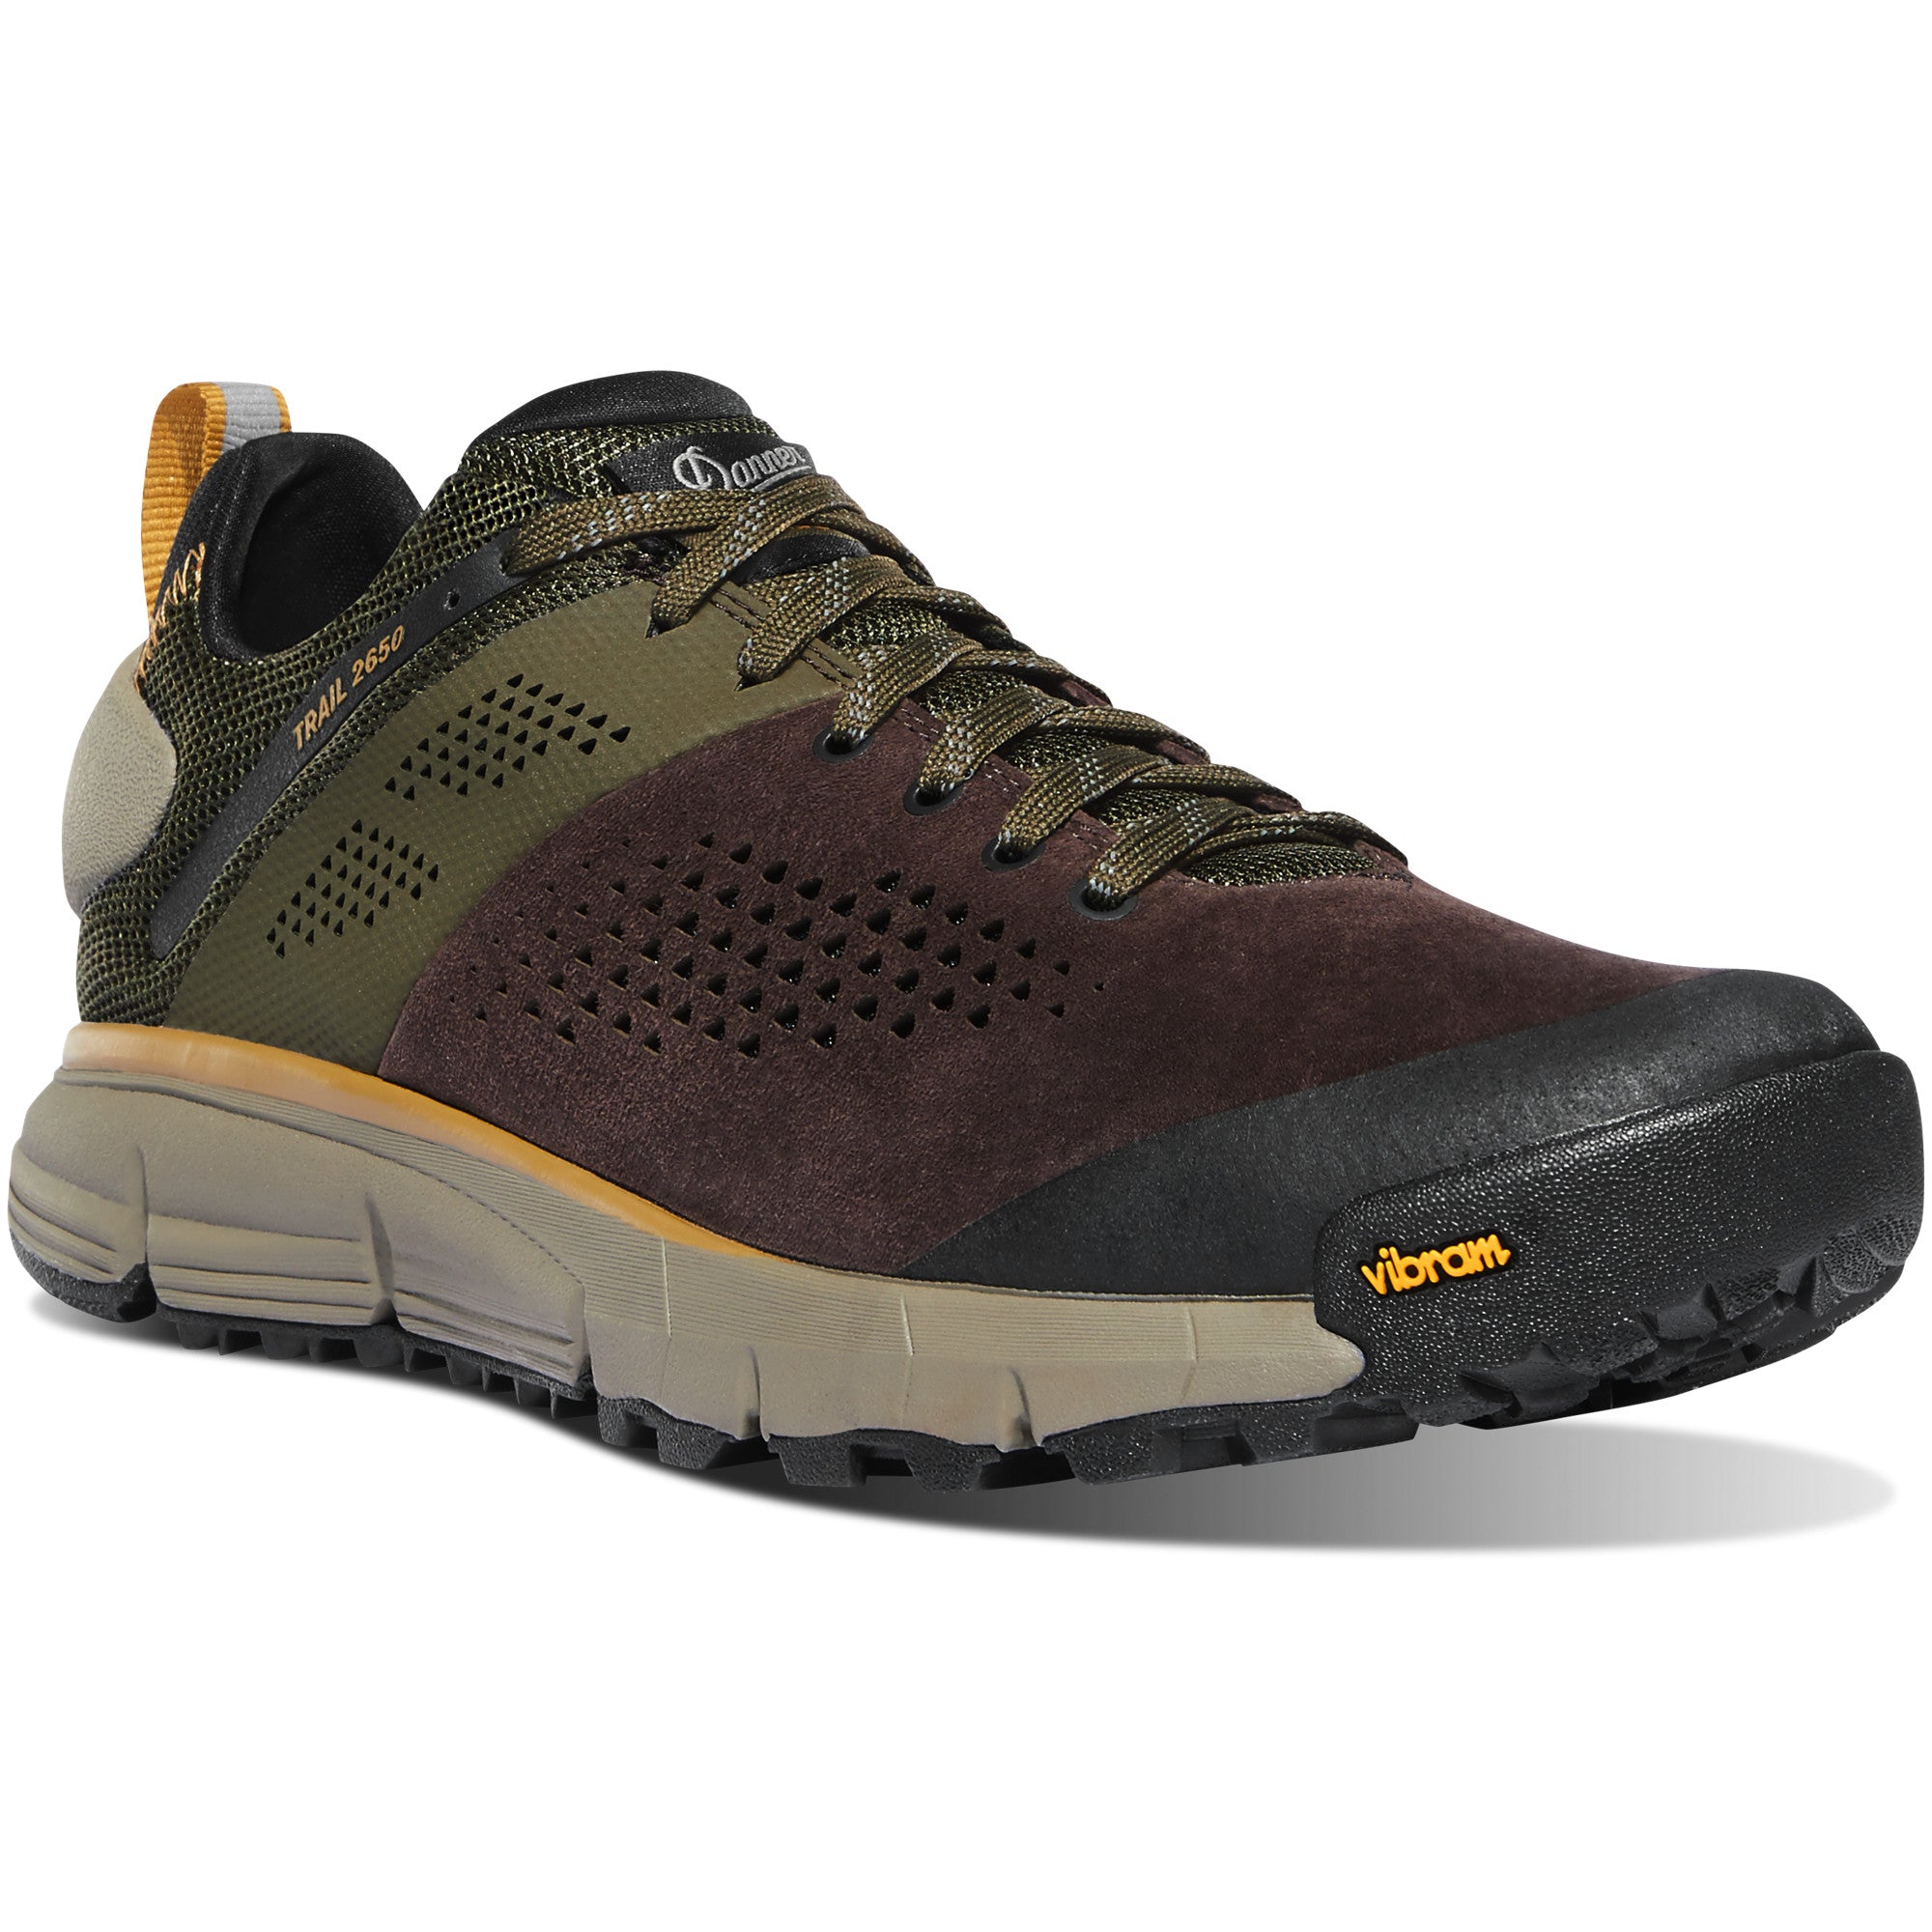 Danner Men's Trail 2650 3" Hiking Shoe in Dark Brown/Green from the side